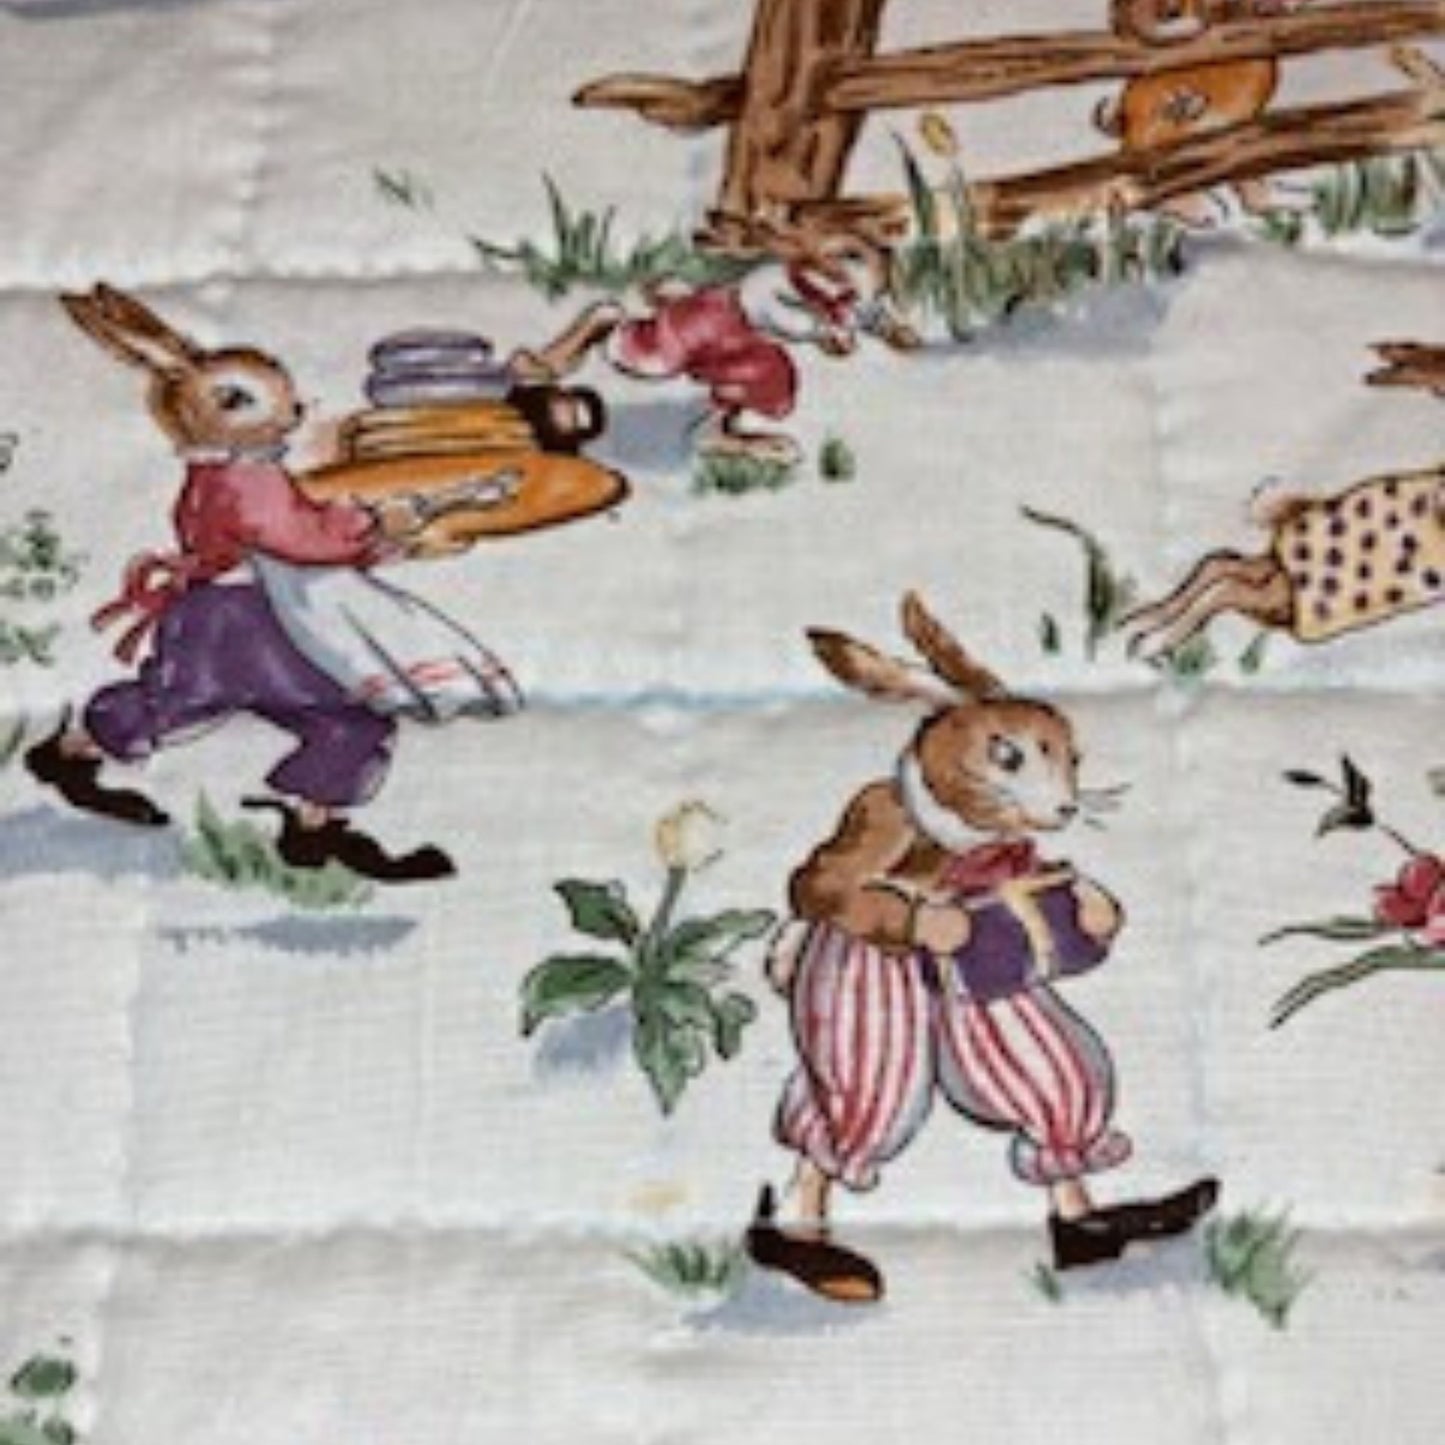 Spring Bunnies Quilted Table Runner